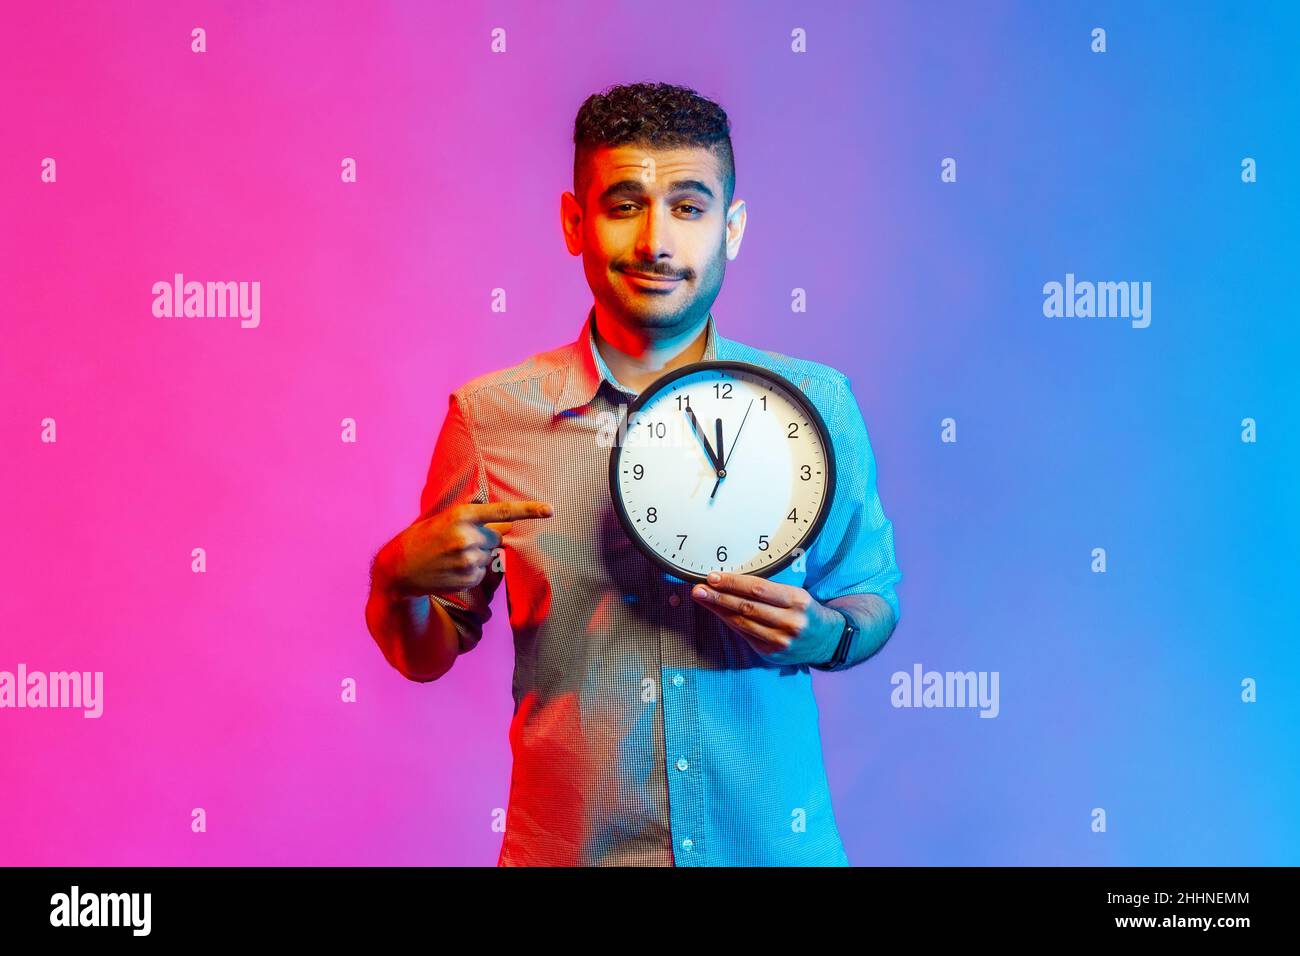 Look at time. Portrait of handsome positive man in shirt pointing big clock and looking at camera, showing wall watches to hurry up. Indoor studio shot isolated on colorful neon light background. Stock Photo